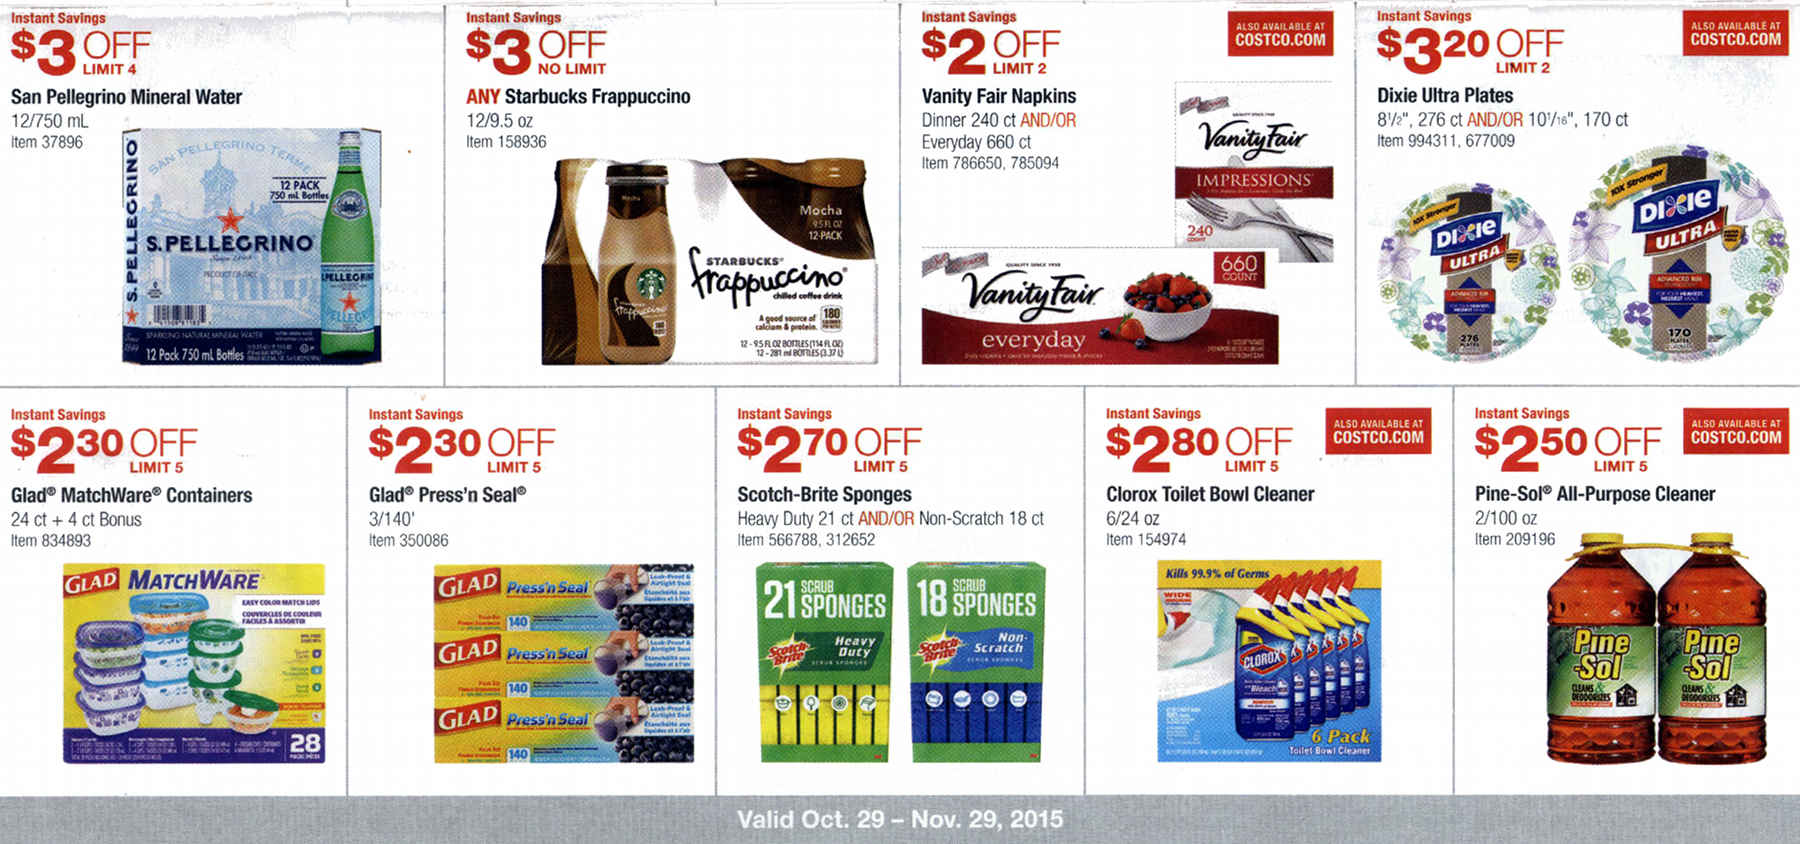 Coupon book full size page -> 11 <-